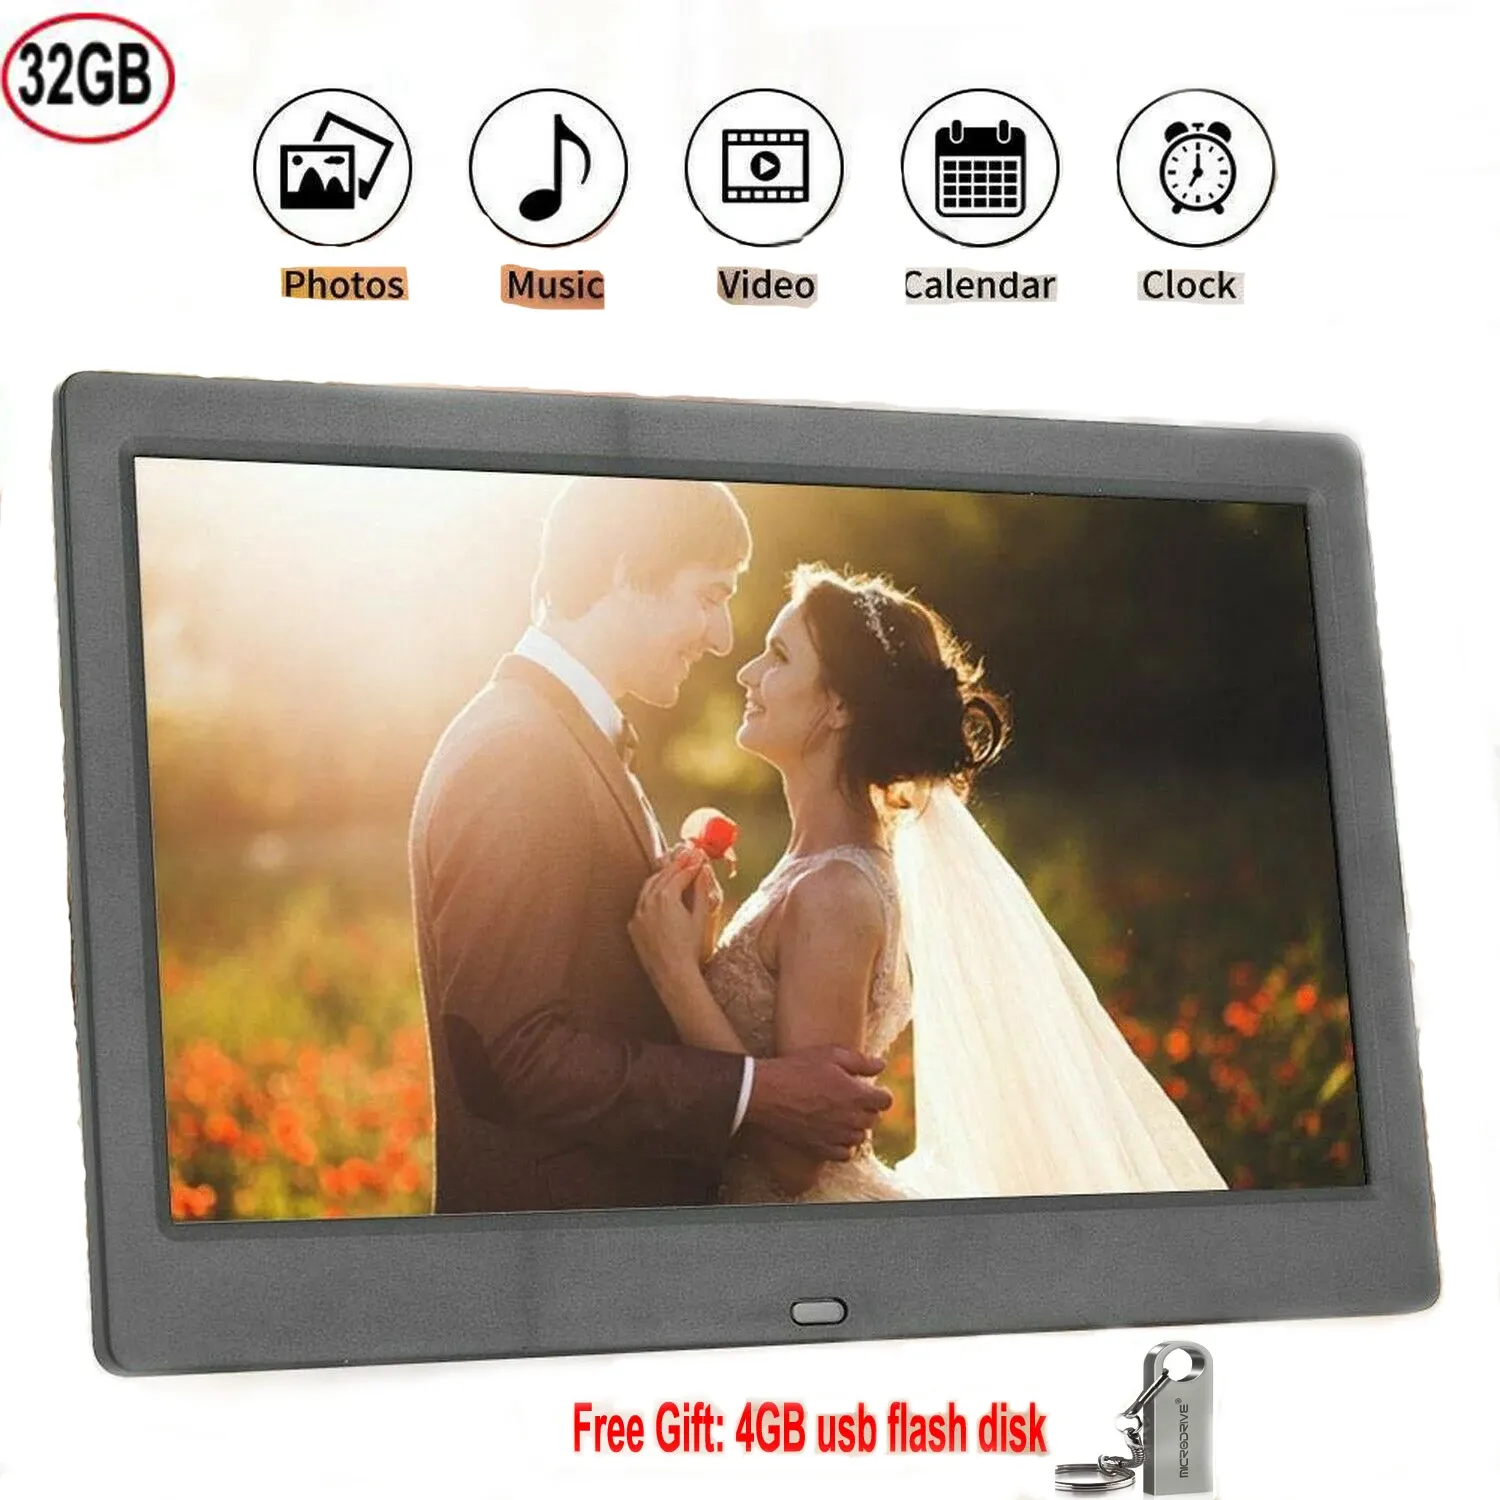 Frames 10 Inch Screen Led Backlight Hd 1024*600 Digital Photo Frame Electronic Album Picture Music Movie Full Function